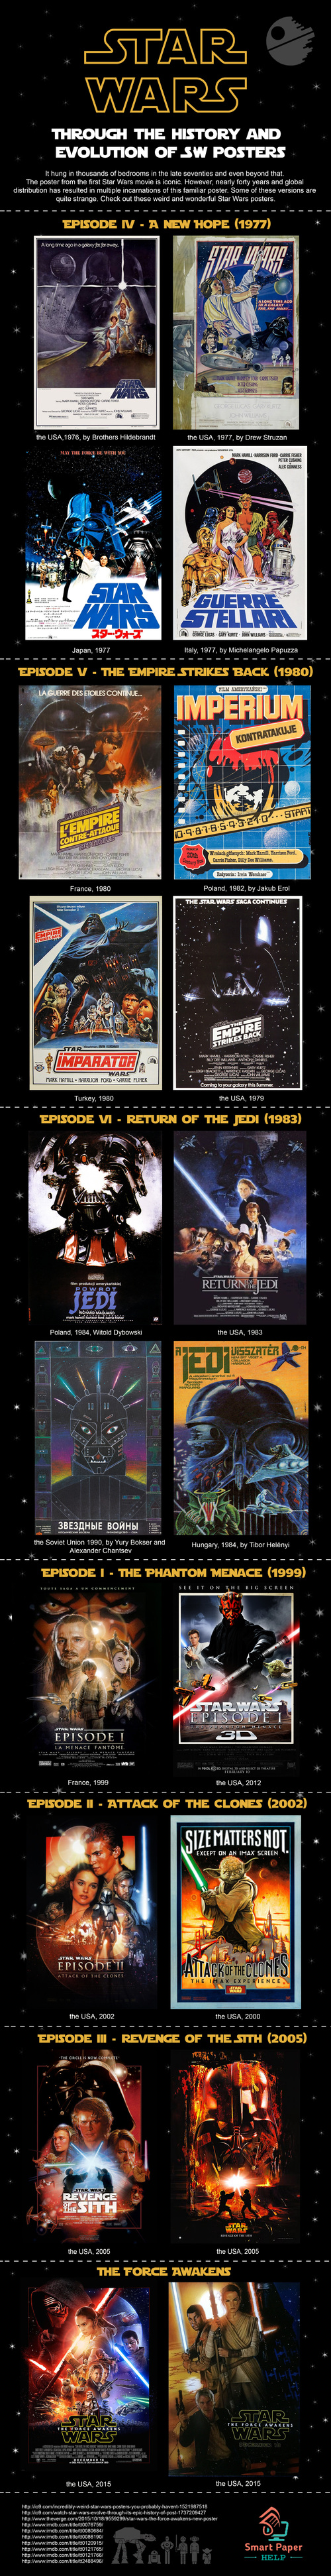 content_star_wars_posters